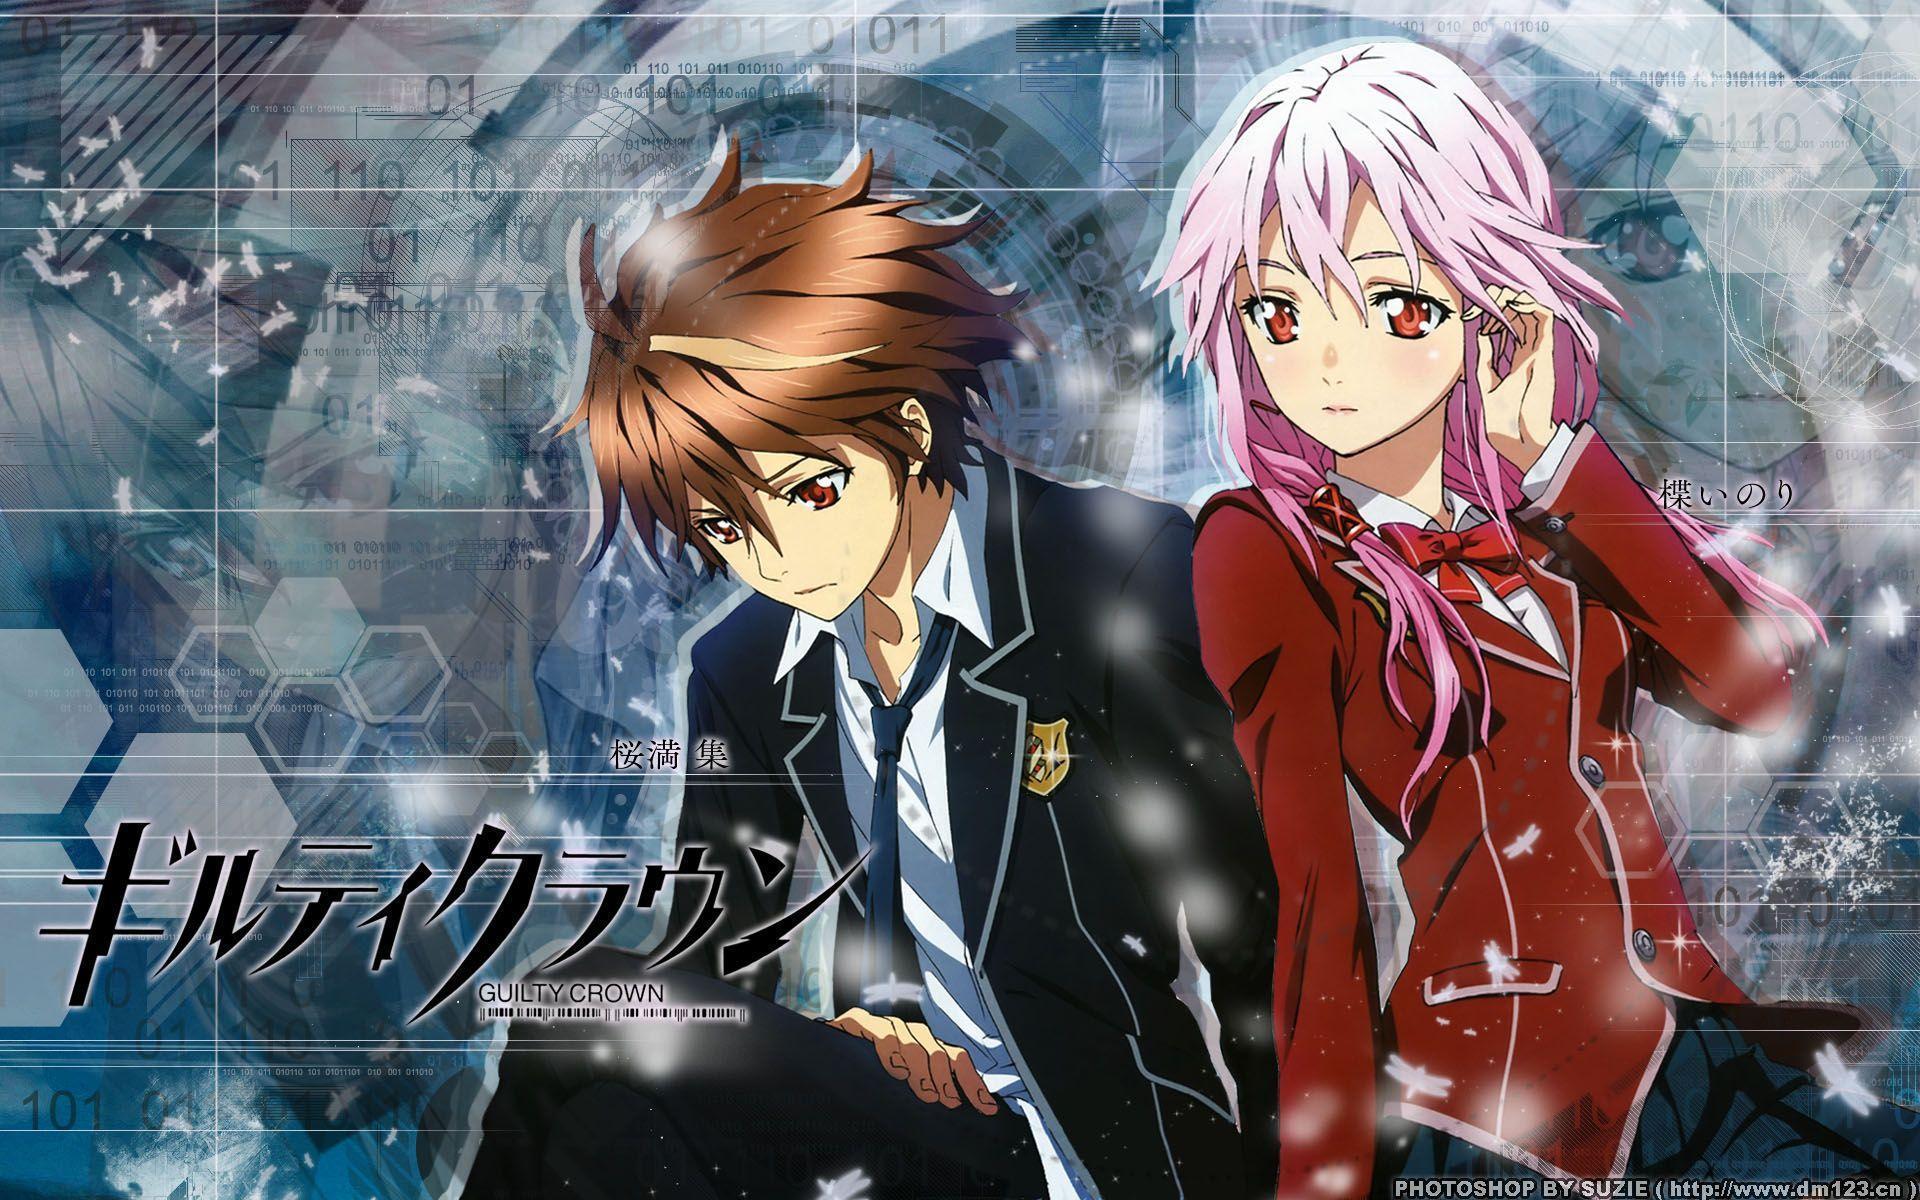 Anime Guilty Crown HD Wallpaper by タニック